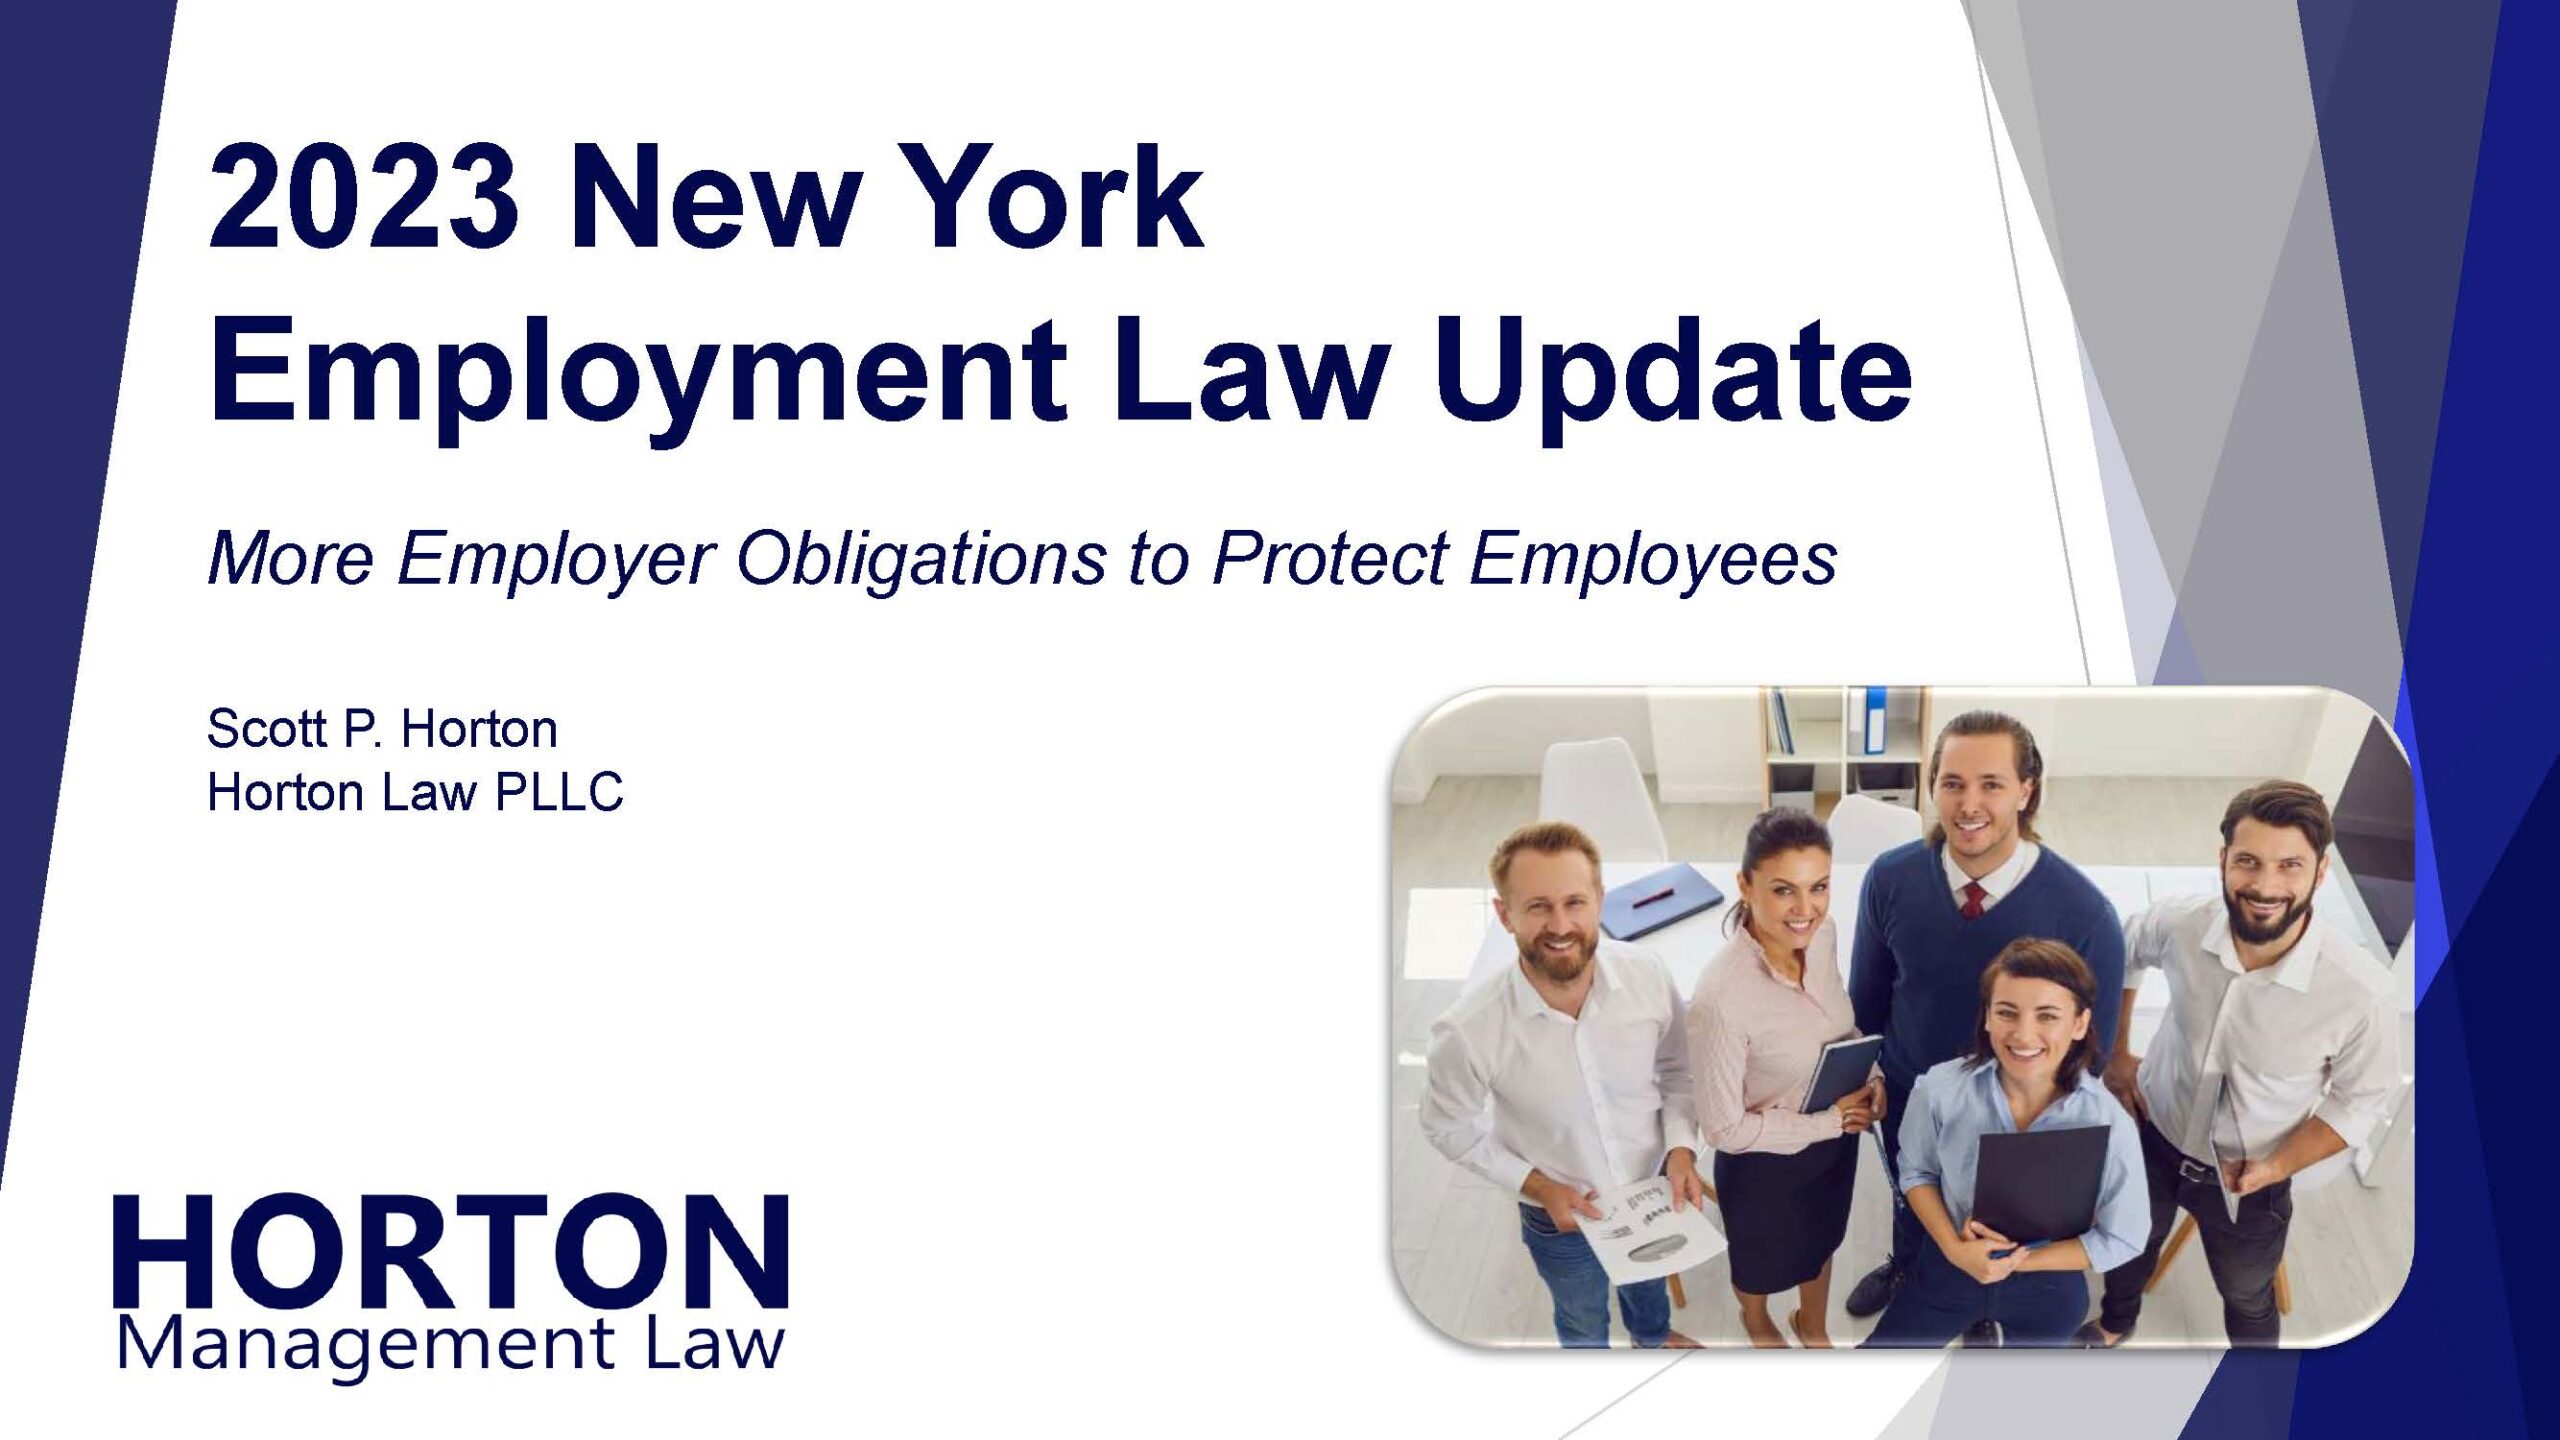 2023 NY Employment Law Update Cover Slide